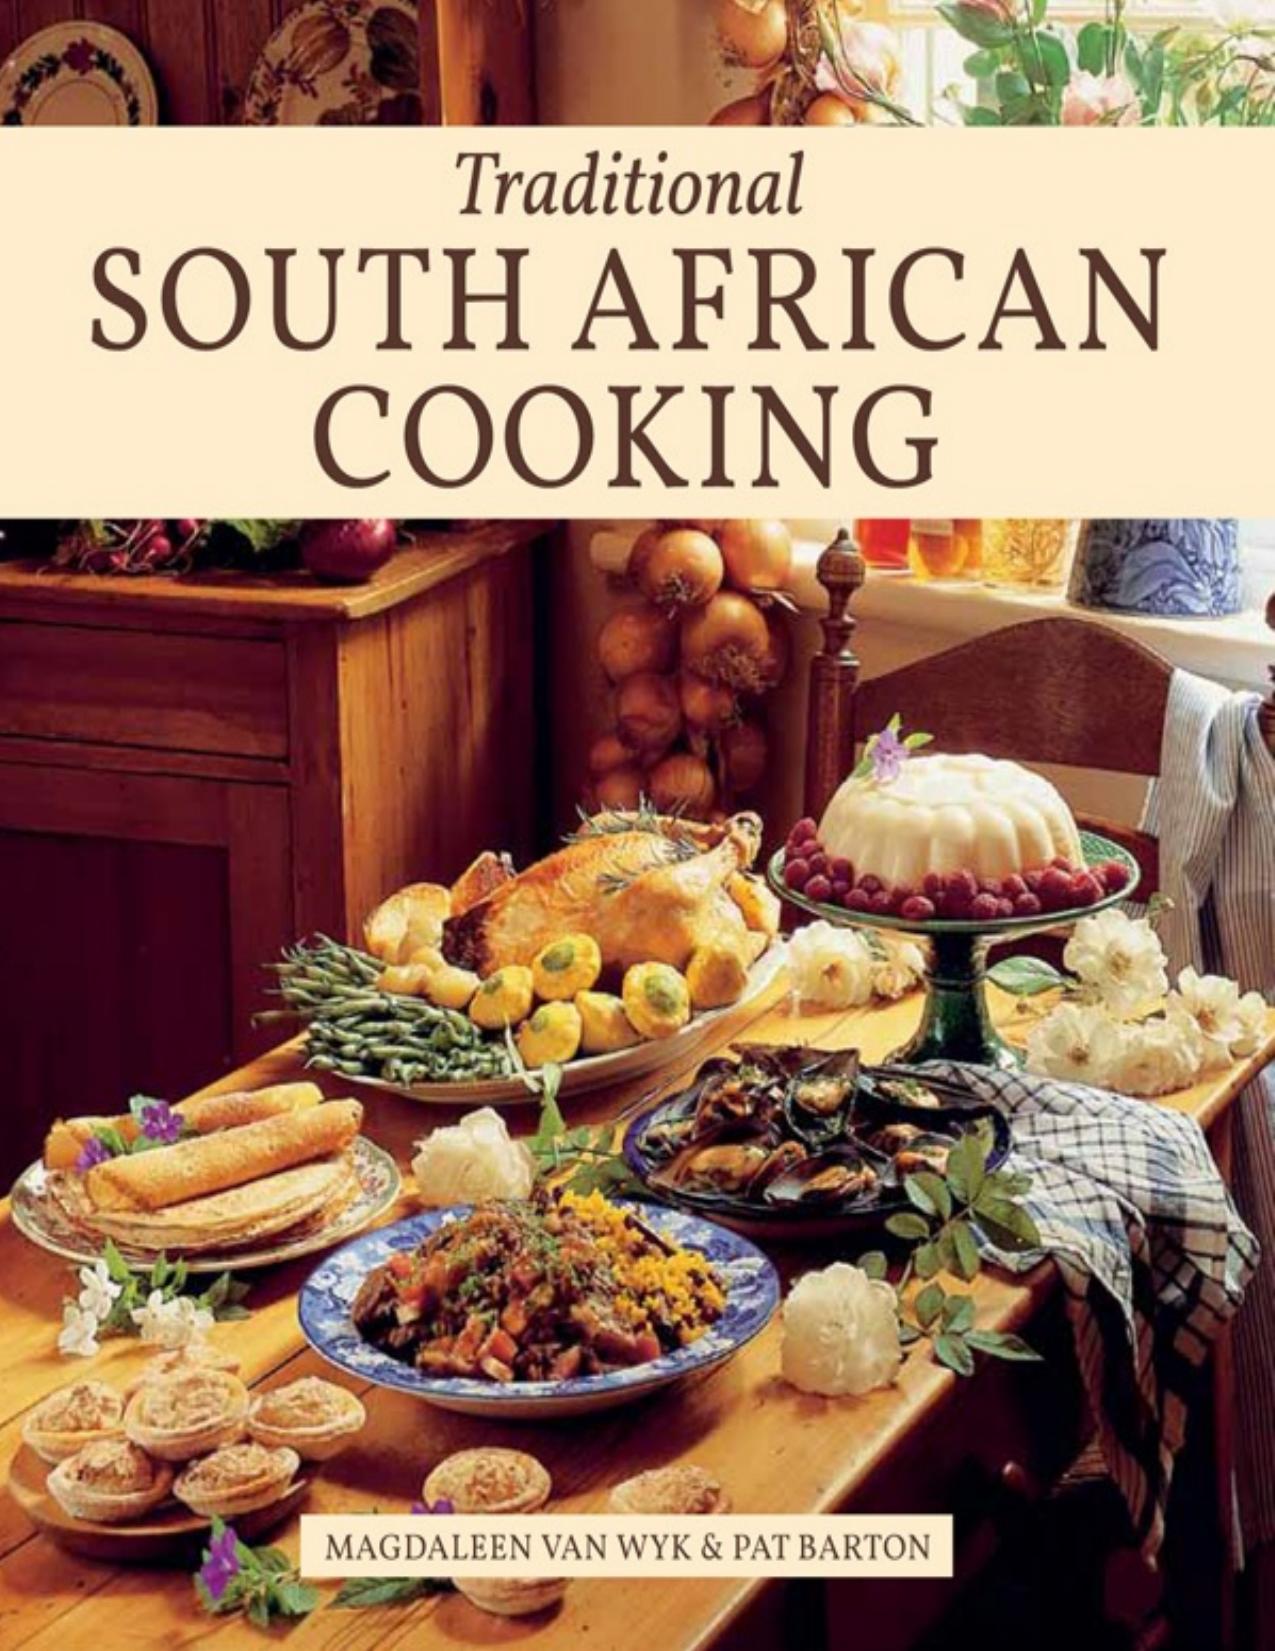 Traditional South African Cooking - PDFDrive.com